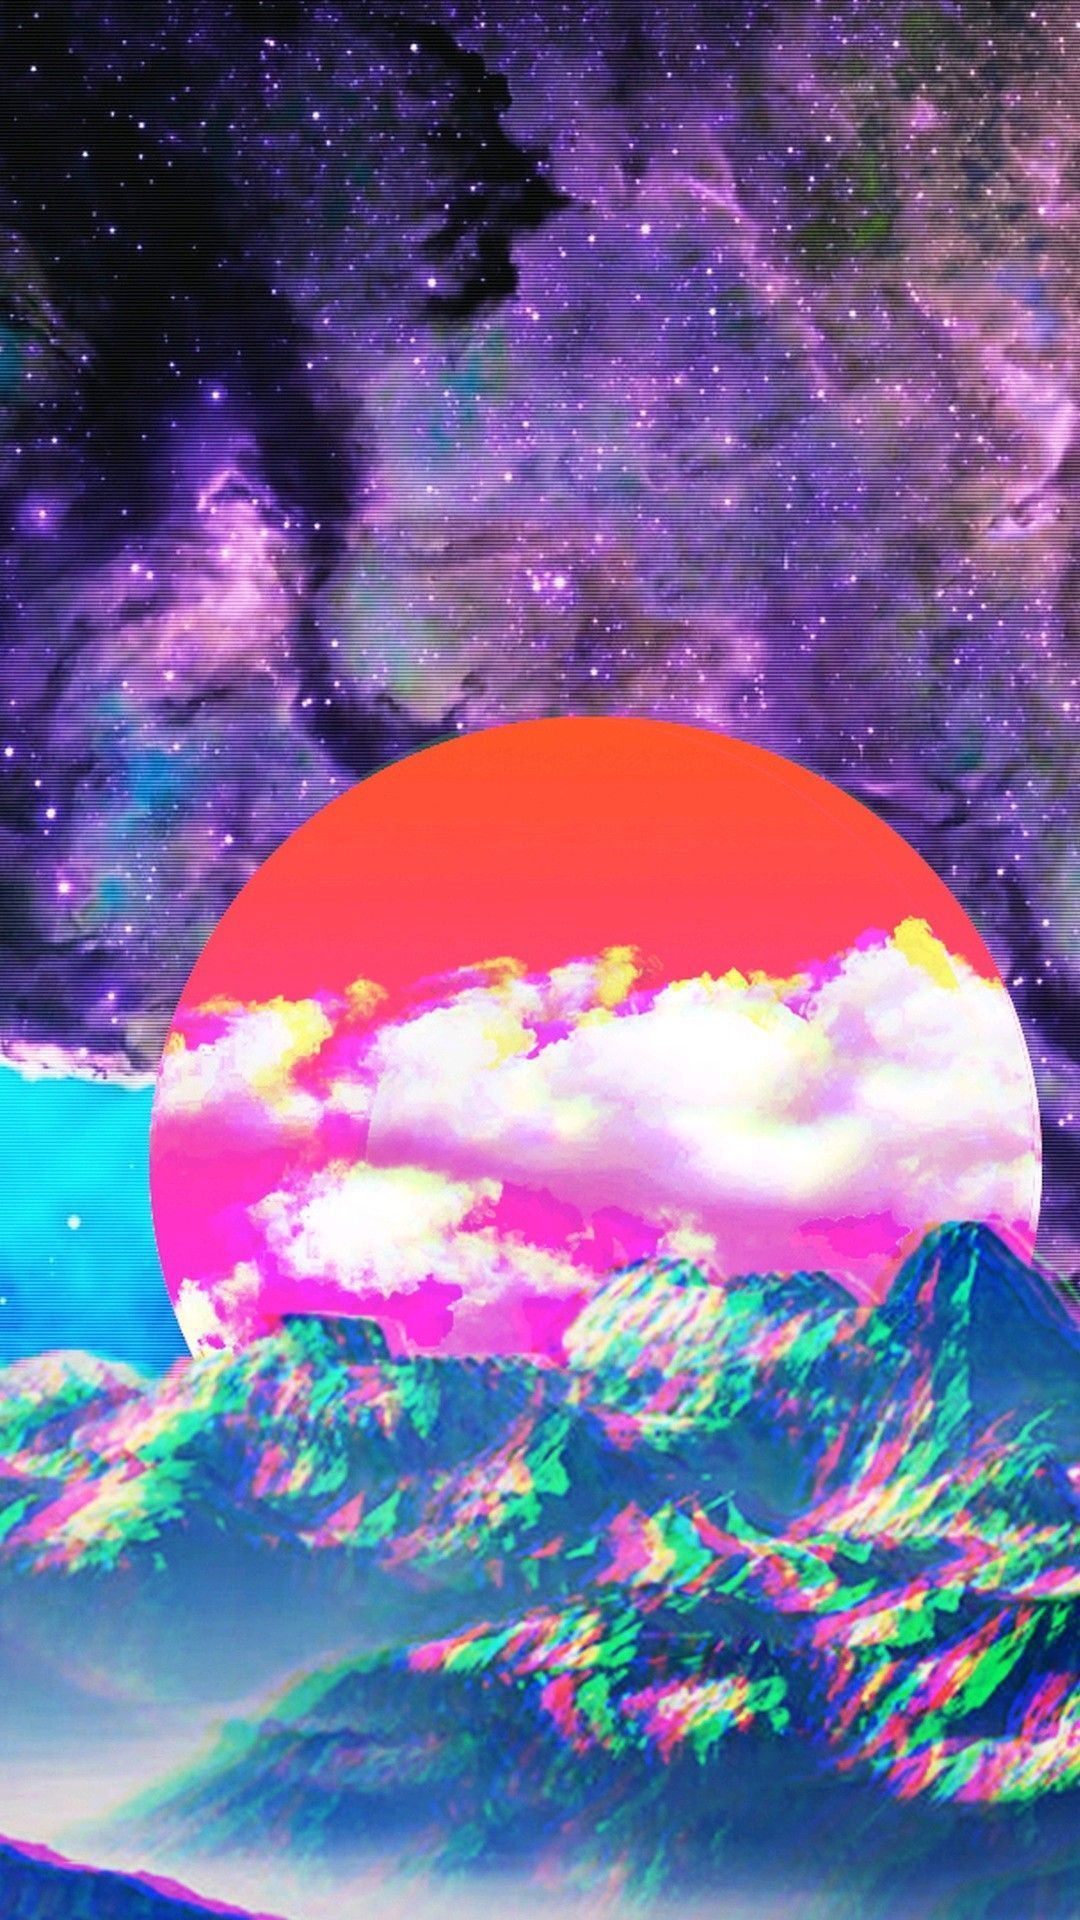 Aesthetic wallpaper for phone with high-resolution 1080x1920 pixel. You can use this wallpaper for your iPhone 5, 6, 7, 8, X, XS, XR backgrounds, Mobile Screensaver, or iPad Lock Screen - Vaporwave, space